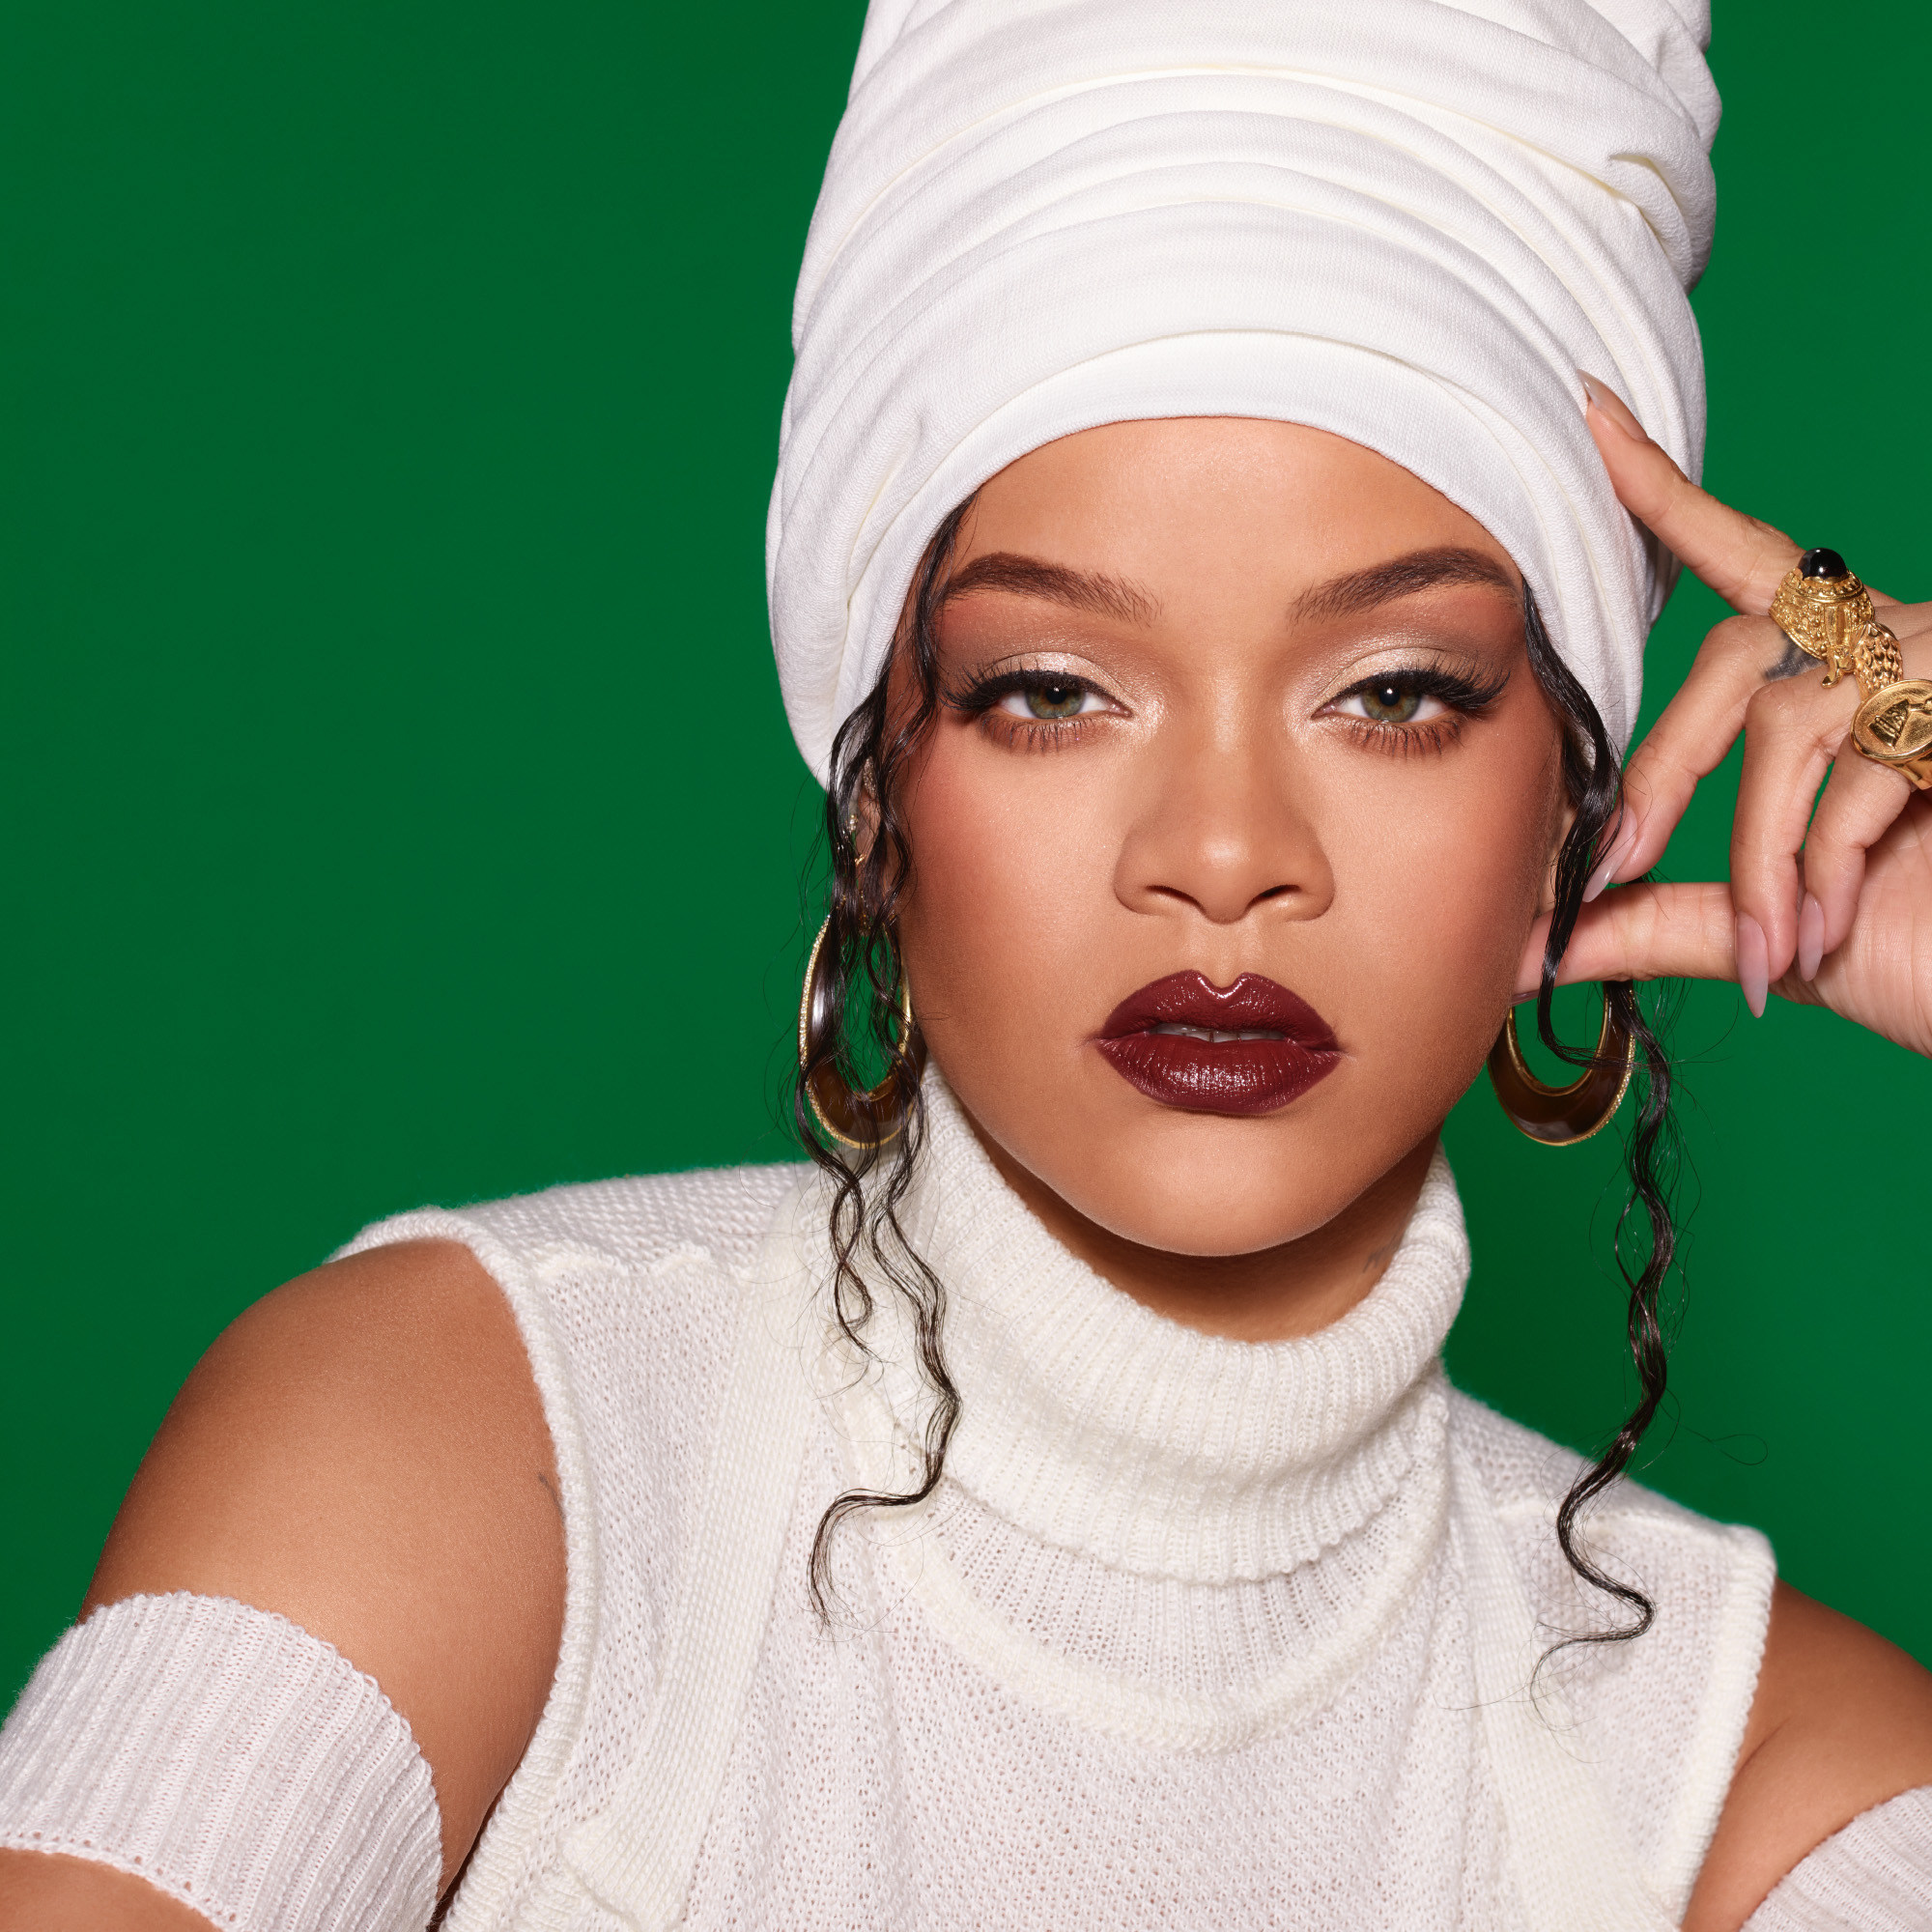 Rihanna Launches Fenty Beauty, a Global Makeup Brand, in 17 Countries